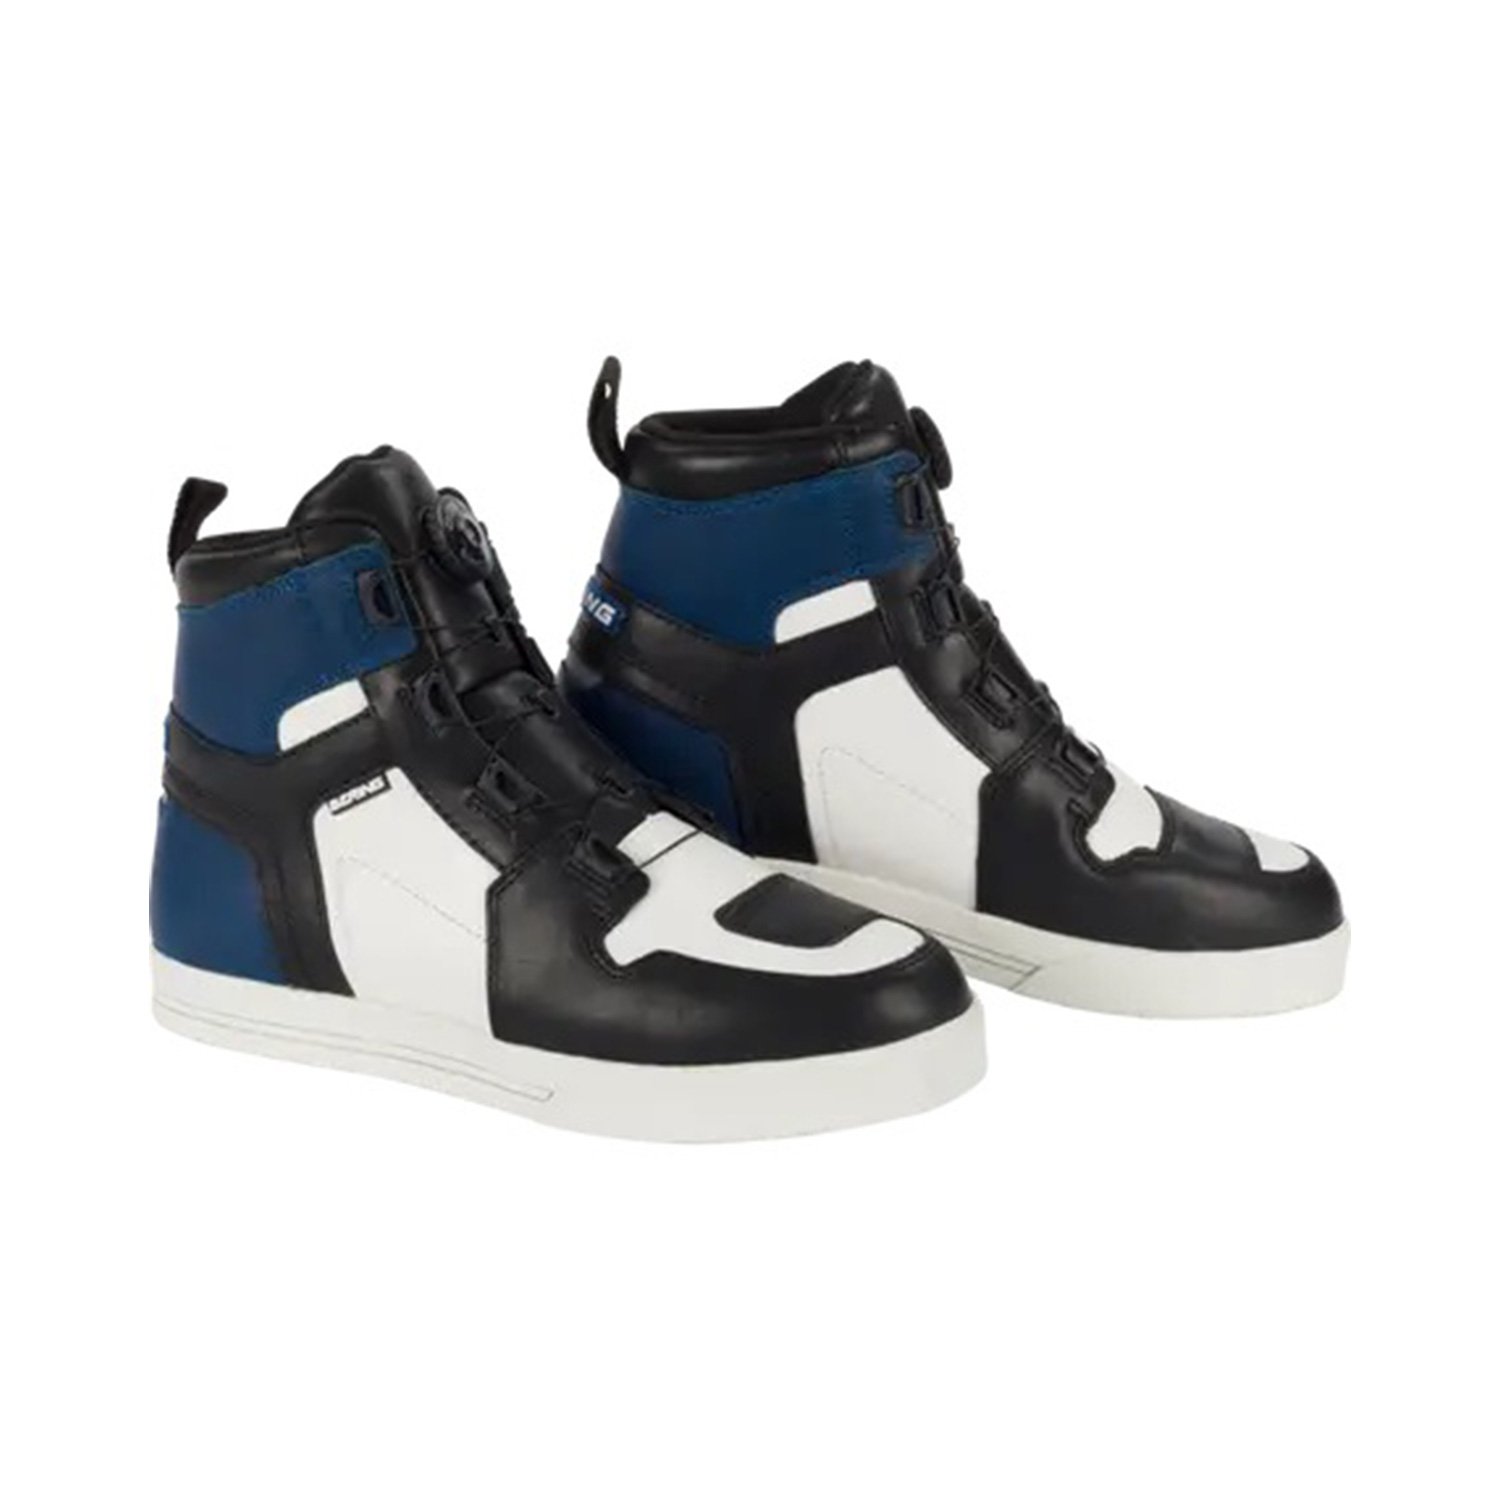 Image of Bering Sneakers Reflex A-Top Black White Blue Size 44 ID 3660815176788